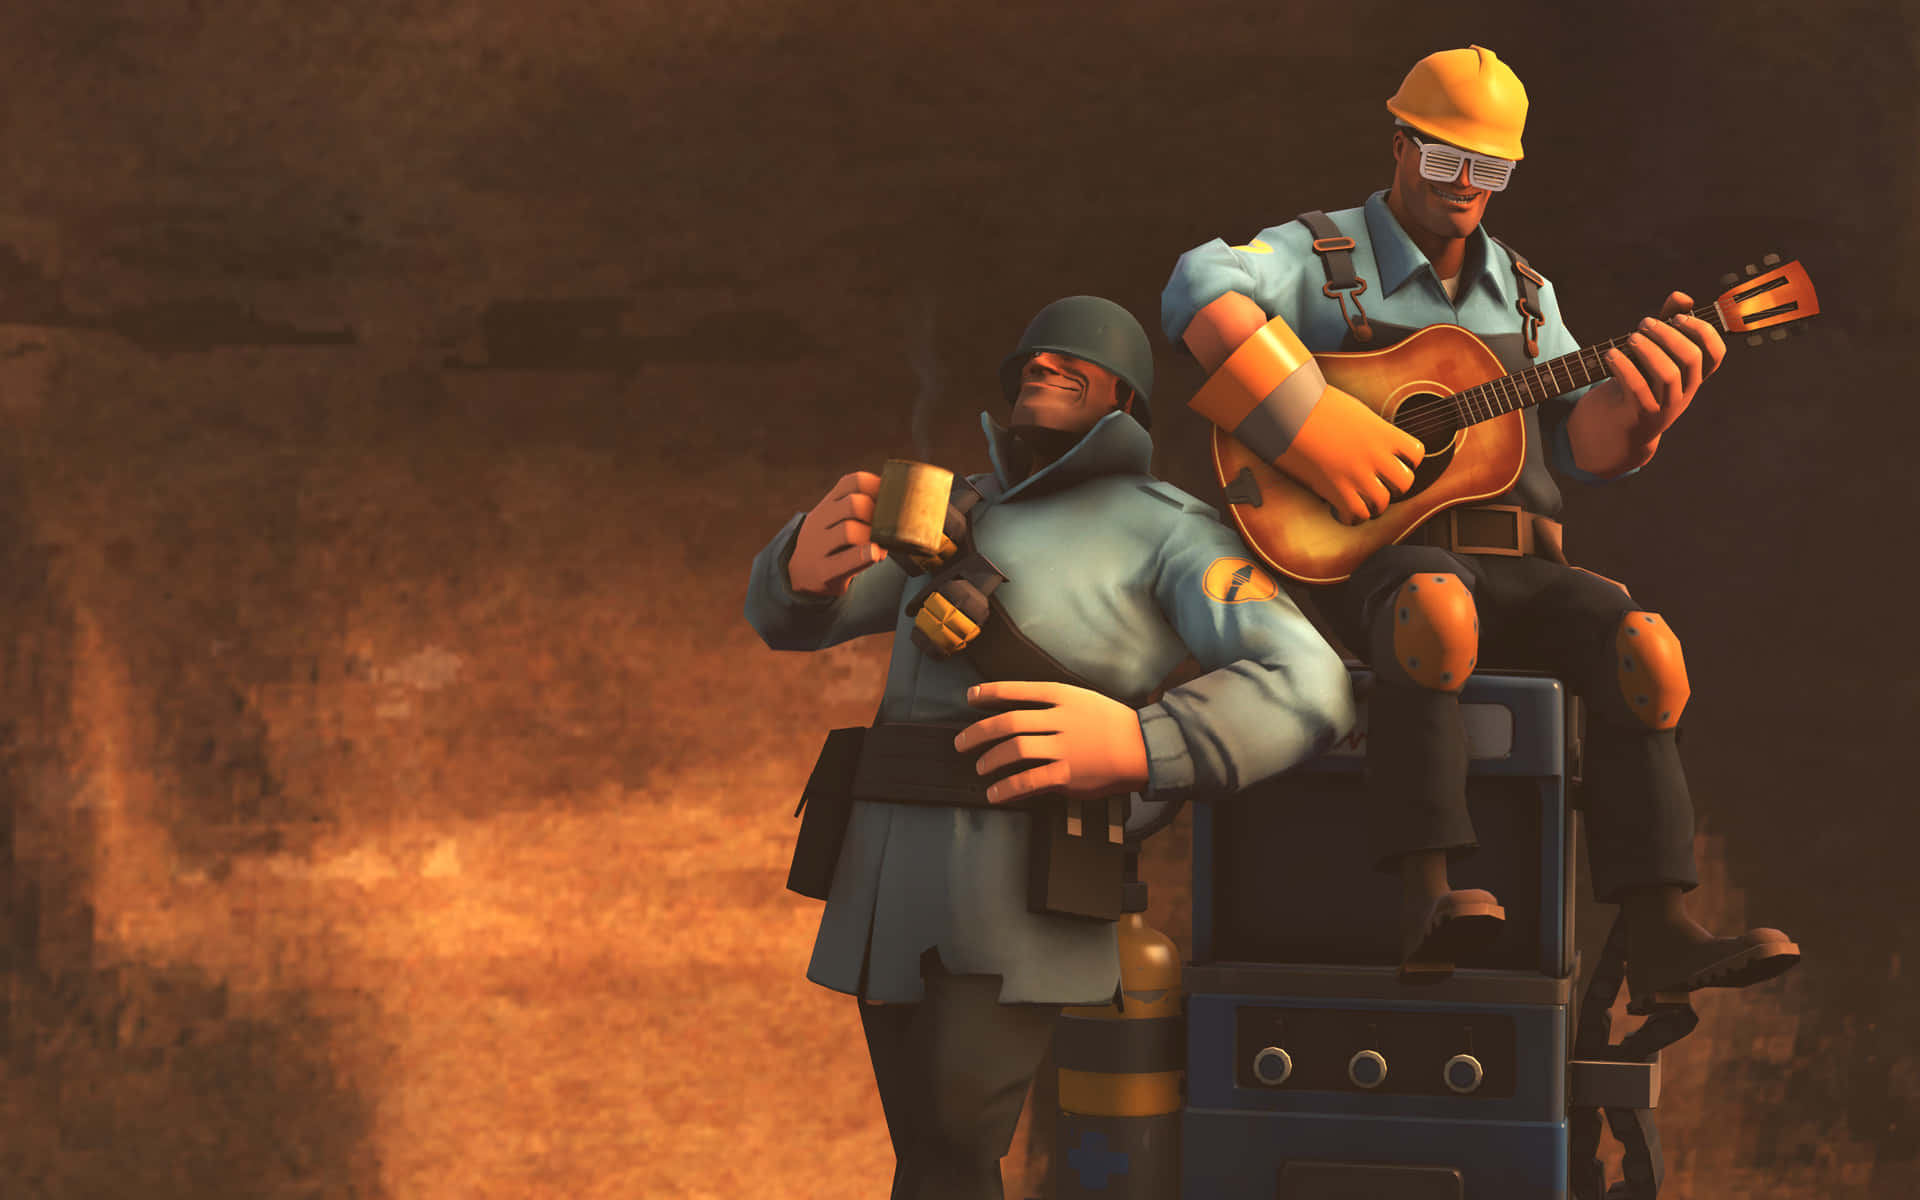 Fun and action-packed gaming with Team Fortress 2